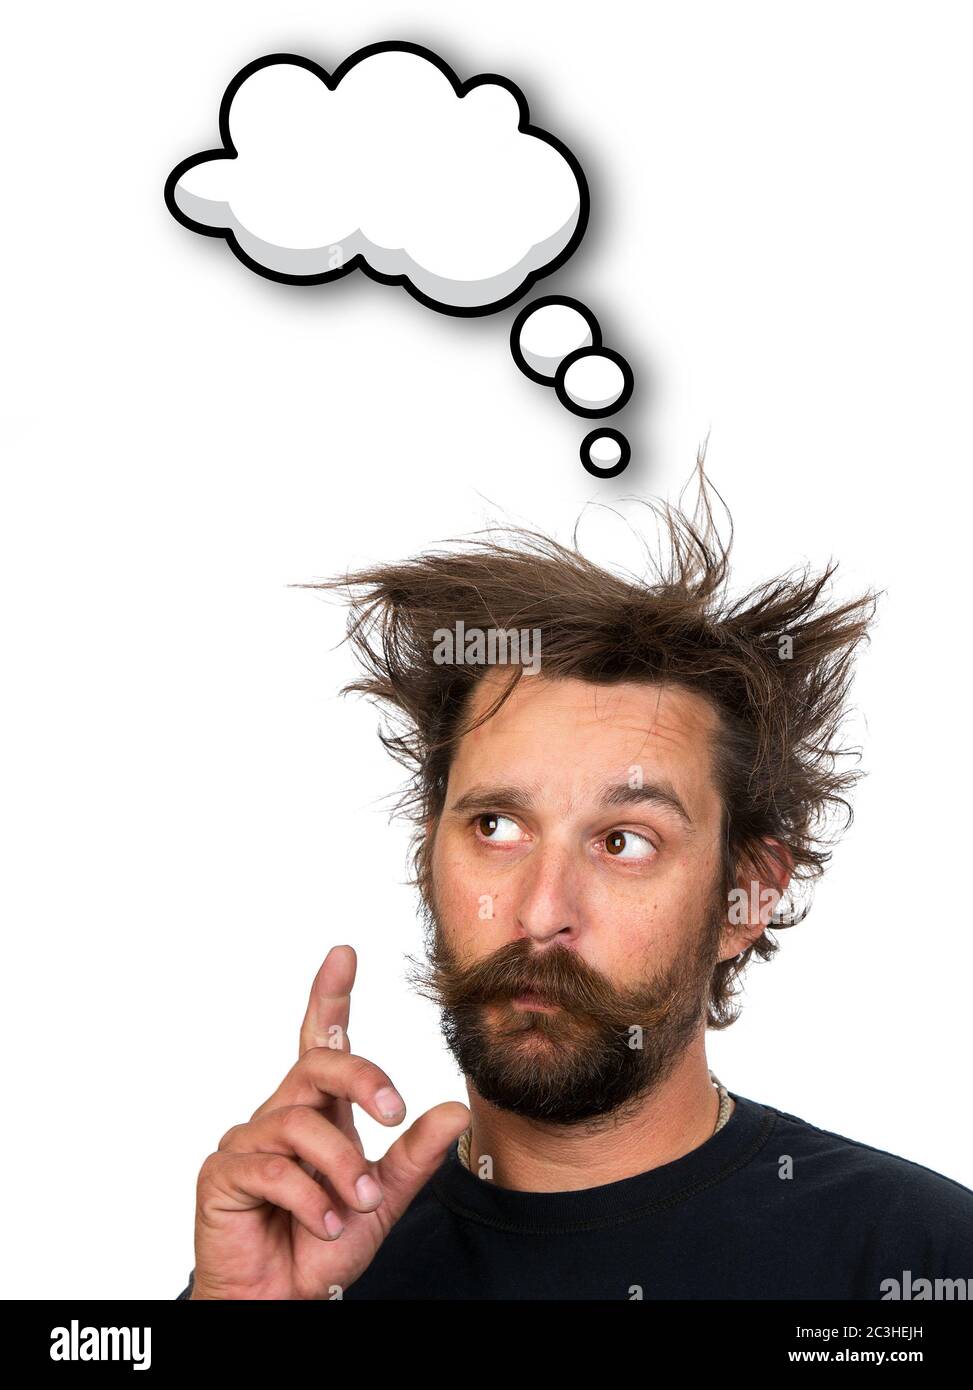 Goofy young man thinking, with thought bubble and space for your text. Isolated on white background Stock Photo